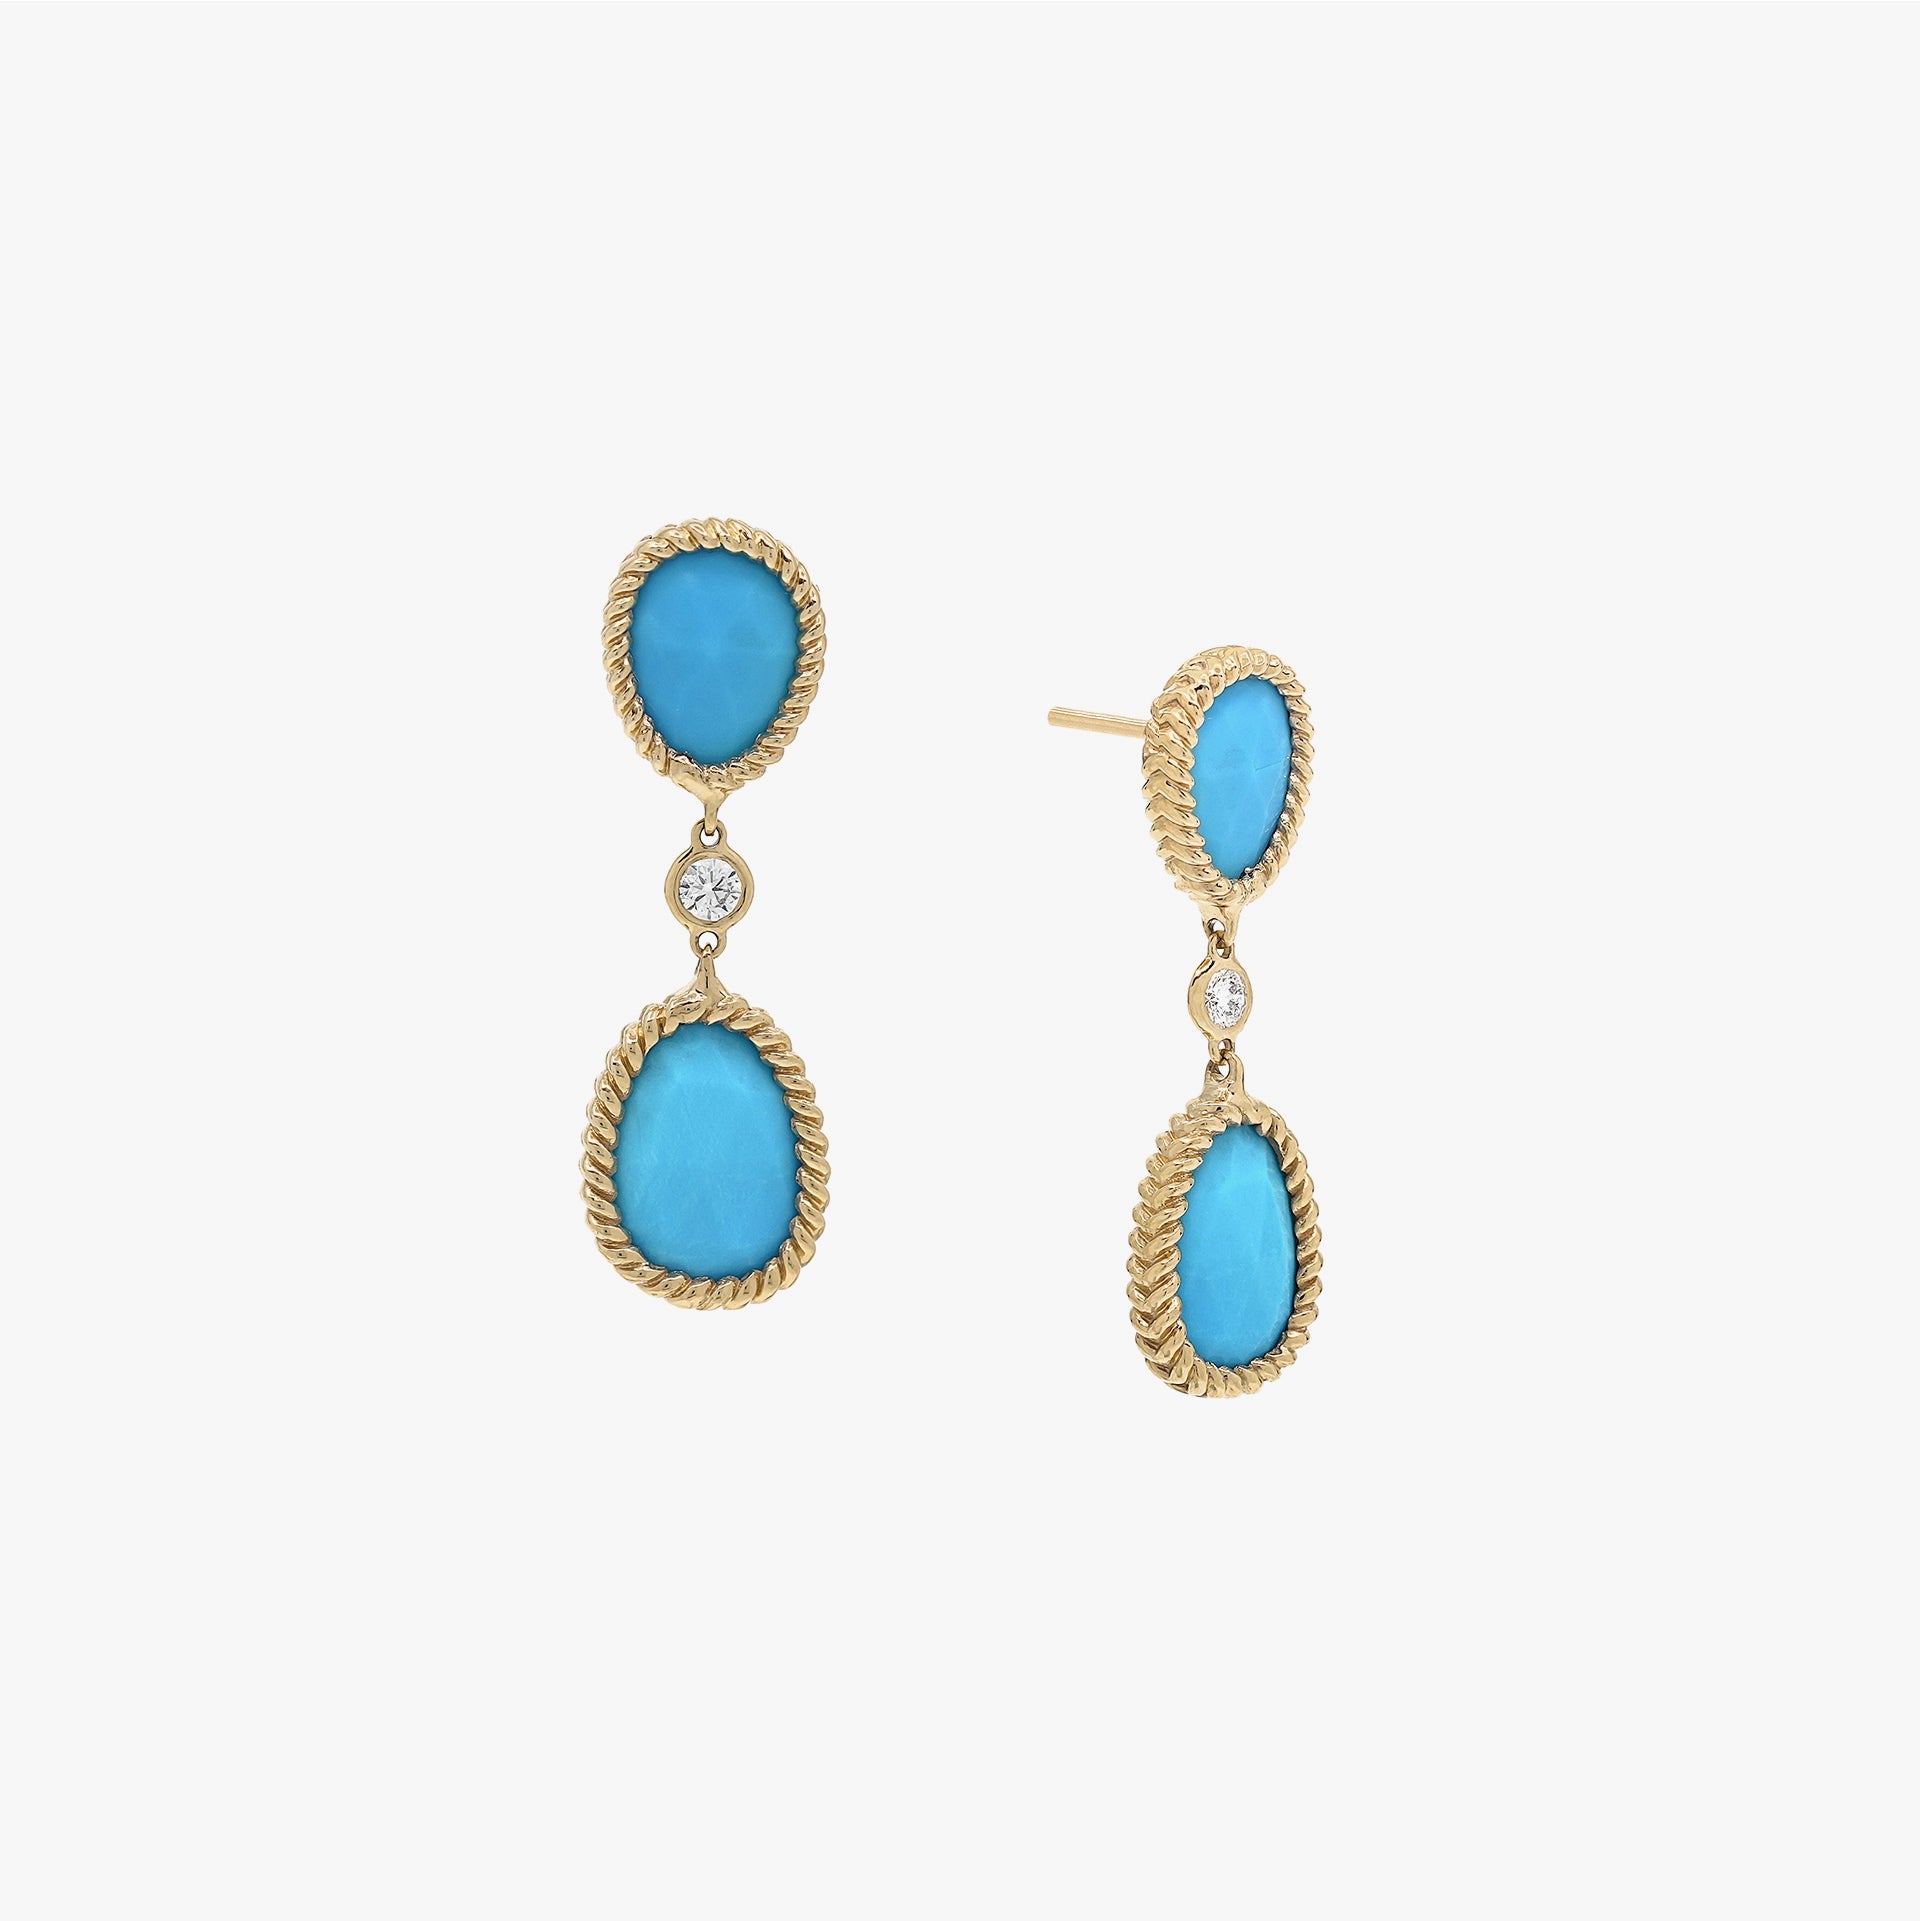 Nina Mariner Earrings In 18 Karat Yellow Gold With Natural White Diamonds And Turquoise Stone